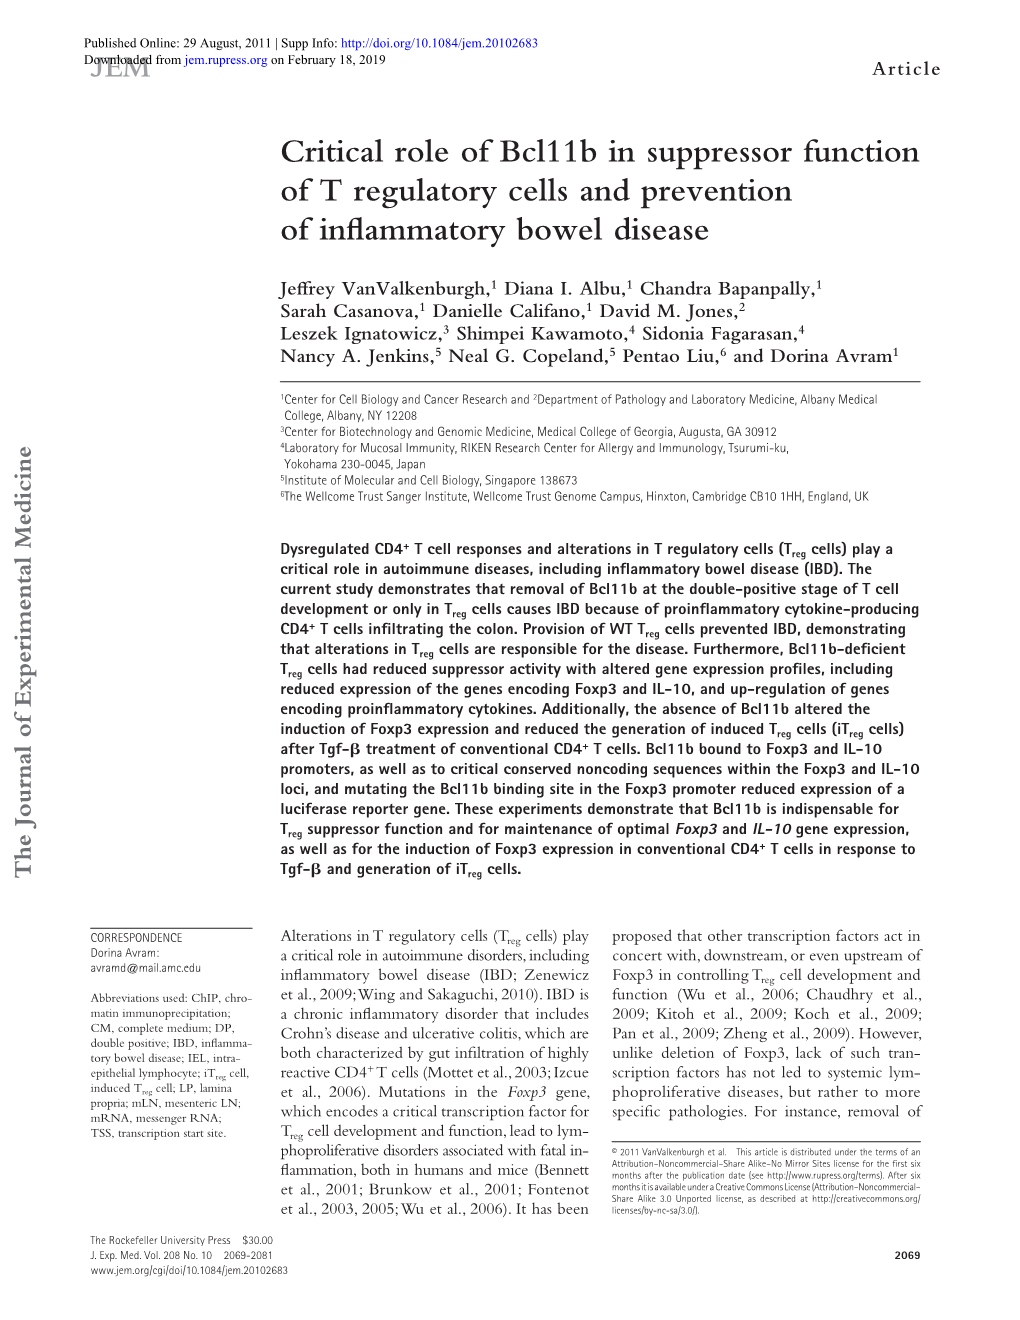 Critical Role of Bcl11b in Suppressor Function of T Regulatory Cells and Prevention of Inflammatory Bowel Disease